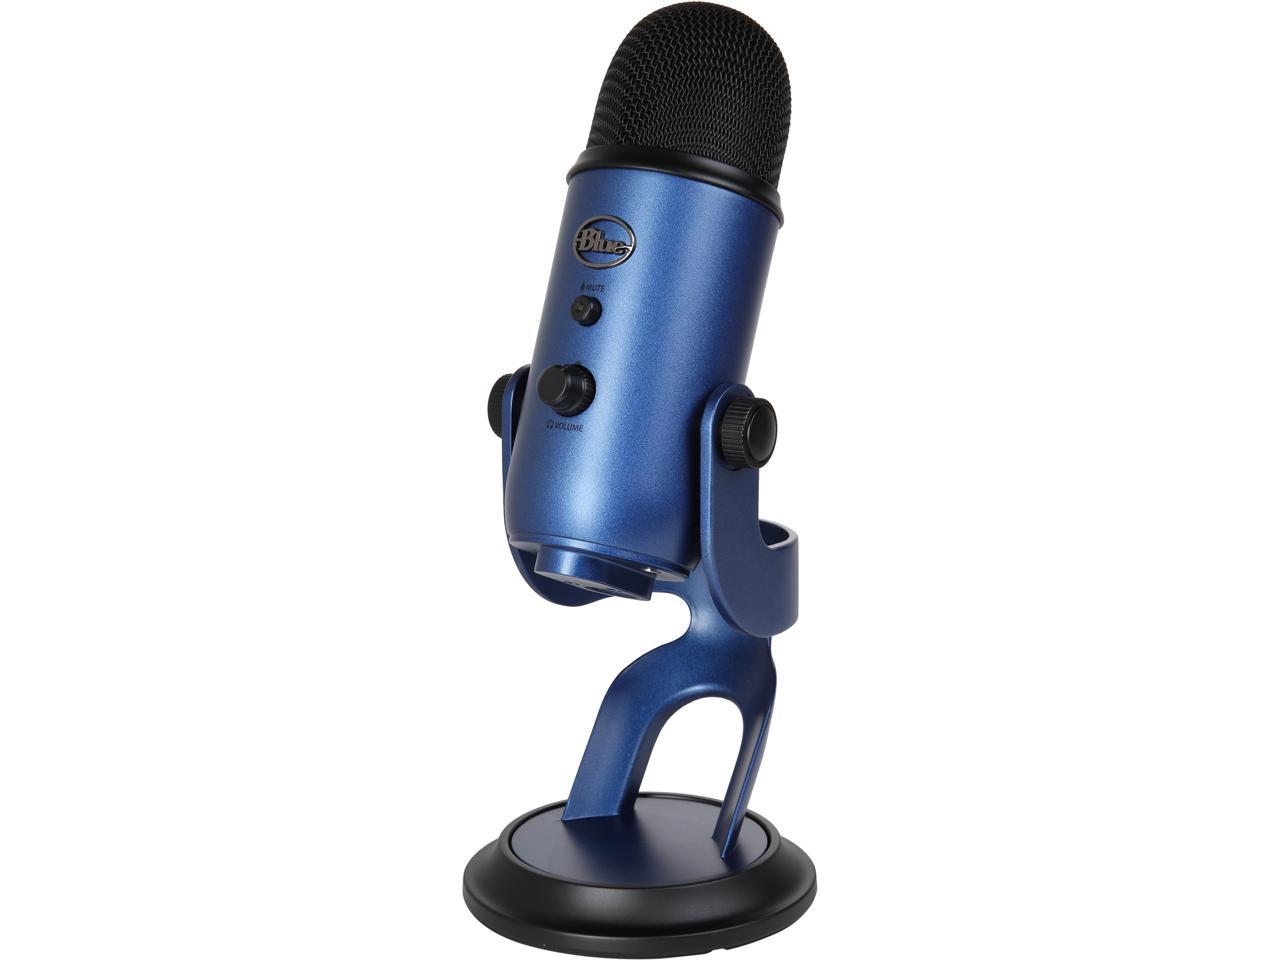 Blue Yeti USB Microphone for PC, Mac, Gaming, Recording, Streaming, Podcasting, Studio and Computer Condenser Mic with Blue VO!CE effects, 4 Pickup Patterns, Plug and Play – Midnight Blue - image 1 of 7